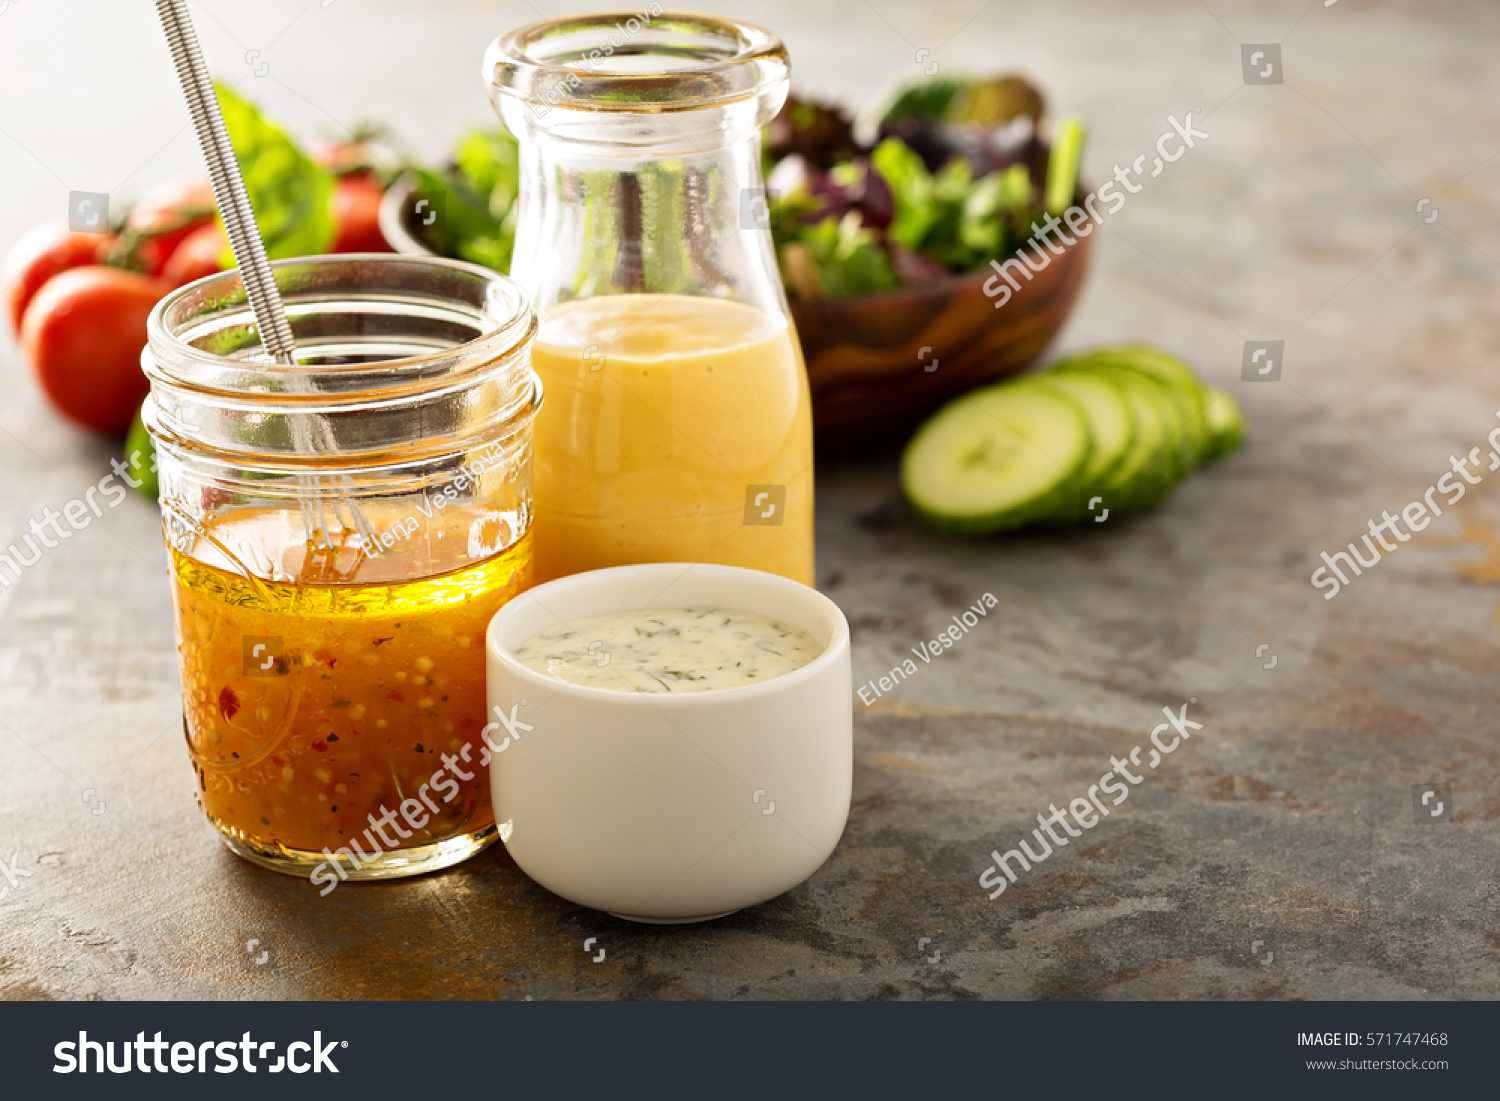 Variety of homemade sauces and salad dressings in jars including vinaigrette, ranch and honey mustard #571747468